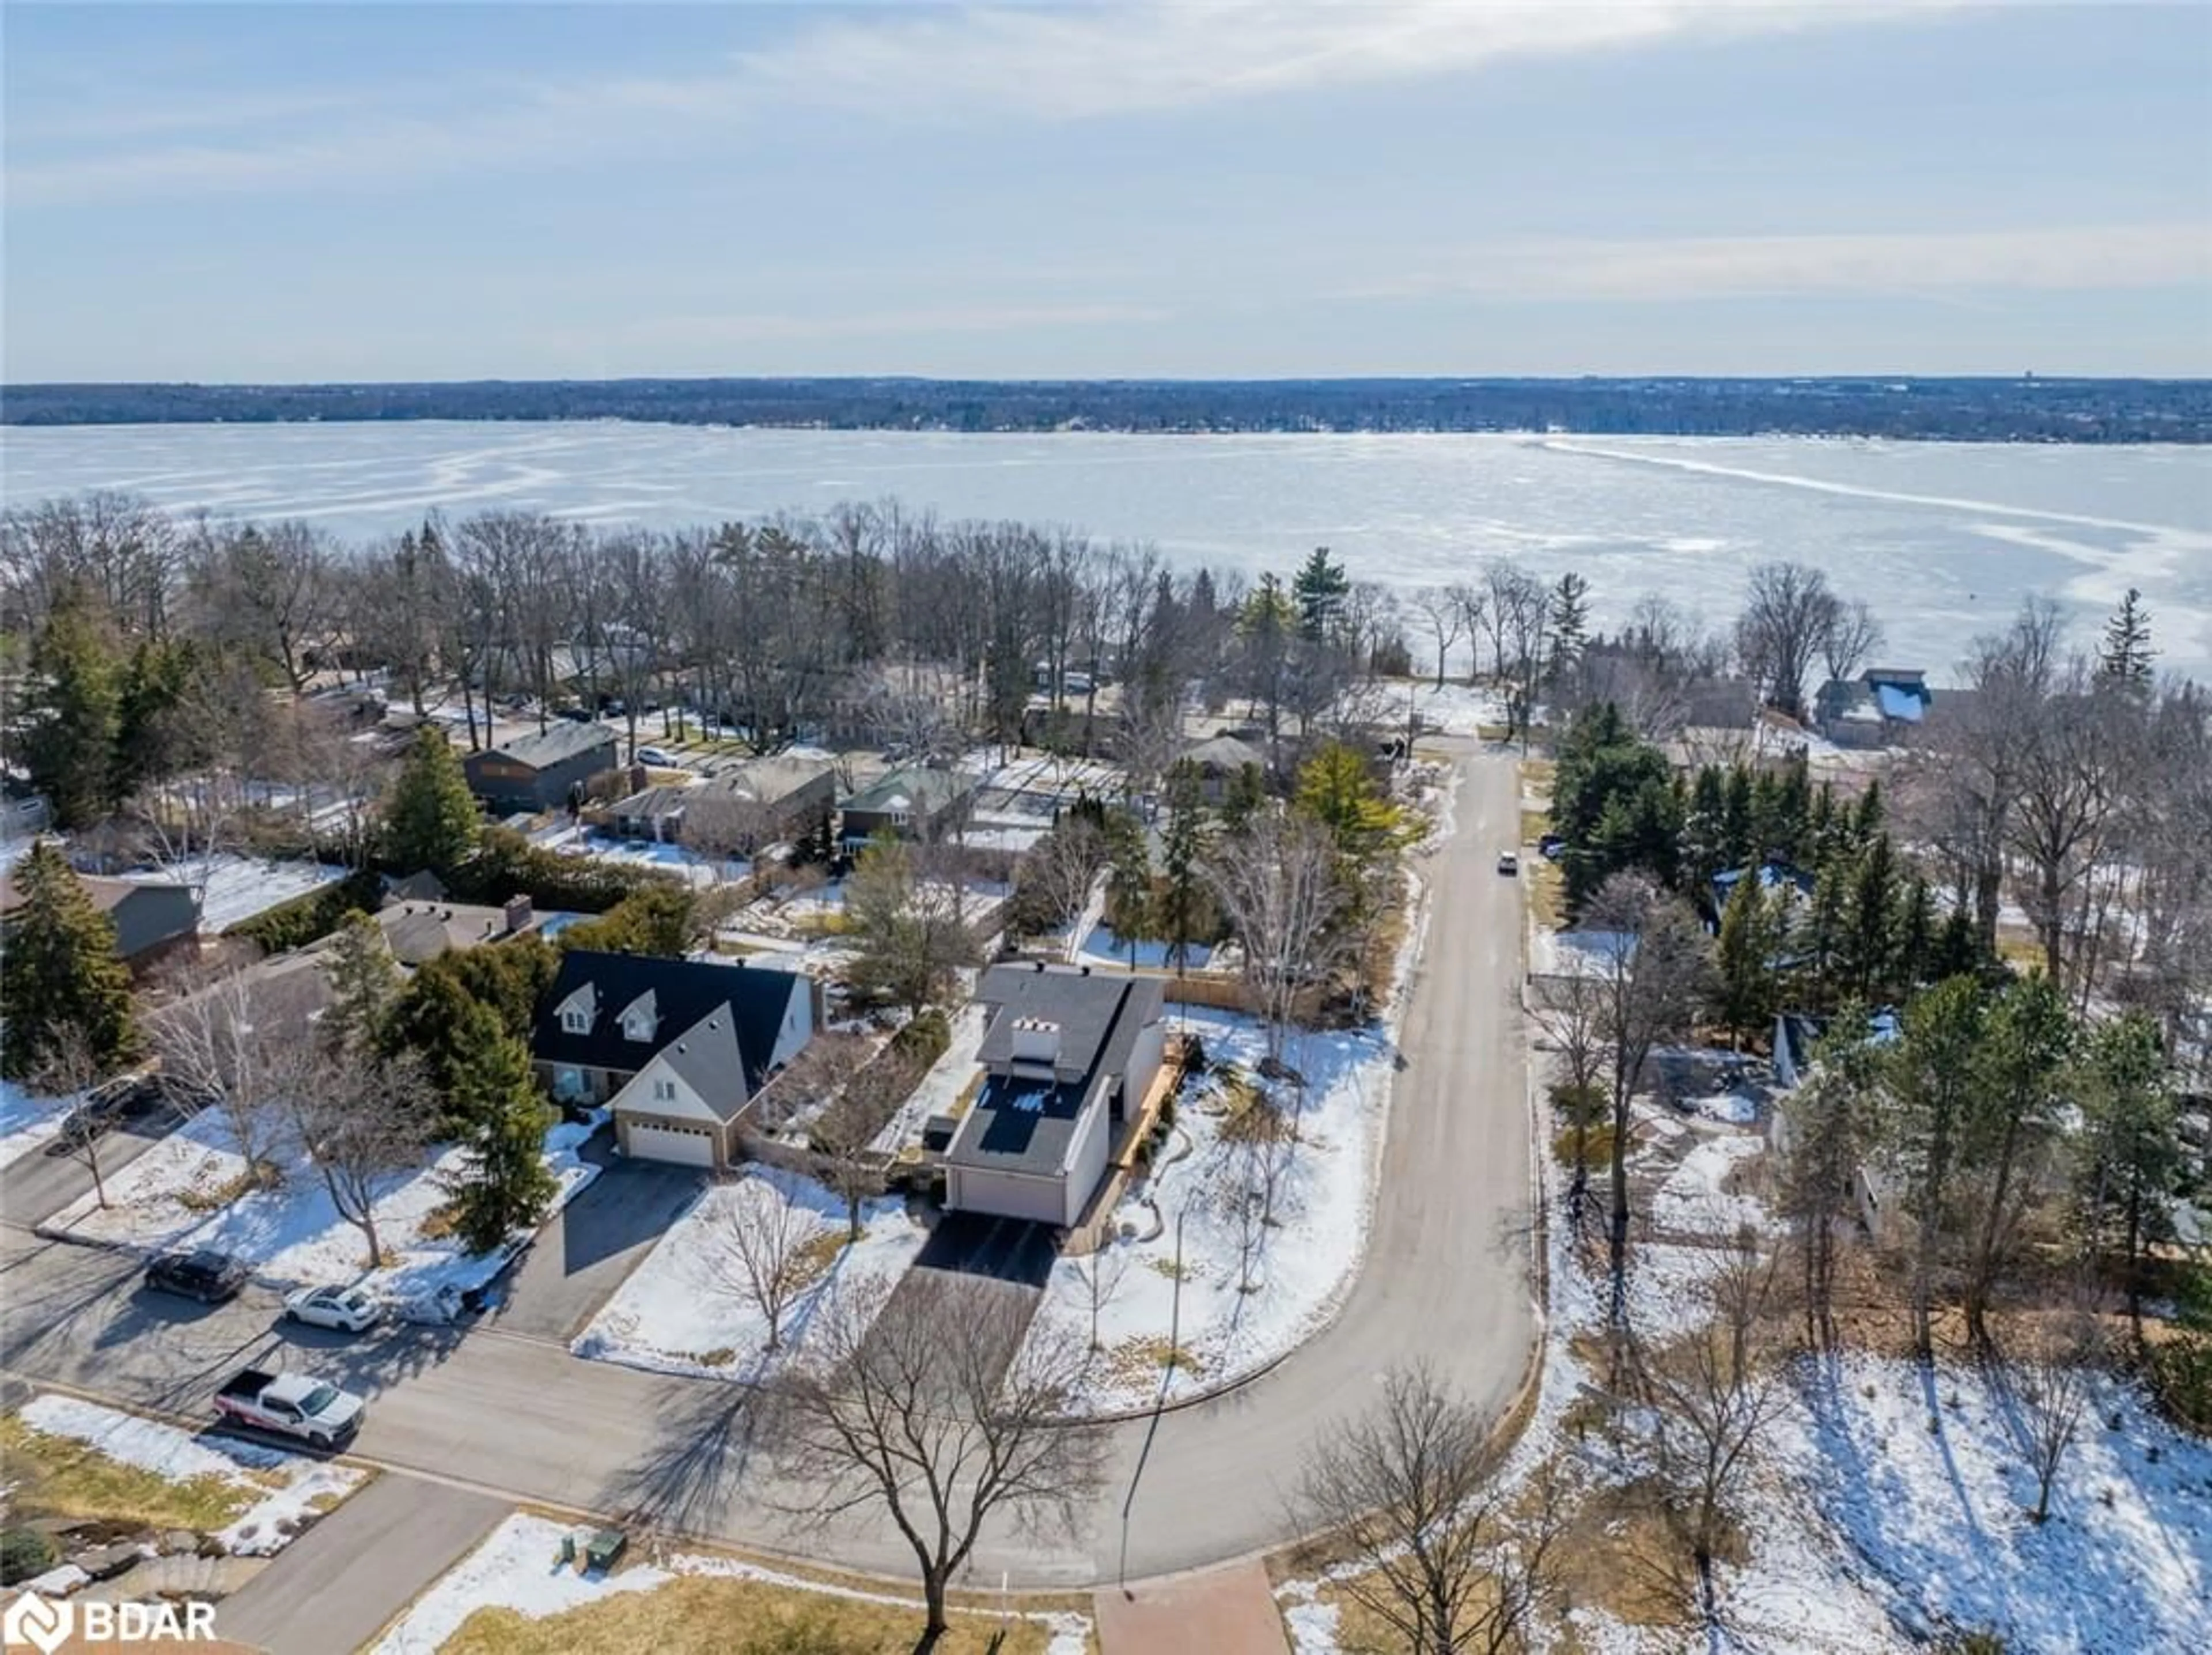 Lakeview for 19 Garrett Cres, Barrie Ontario L4M 5K7